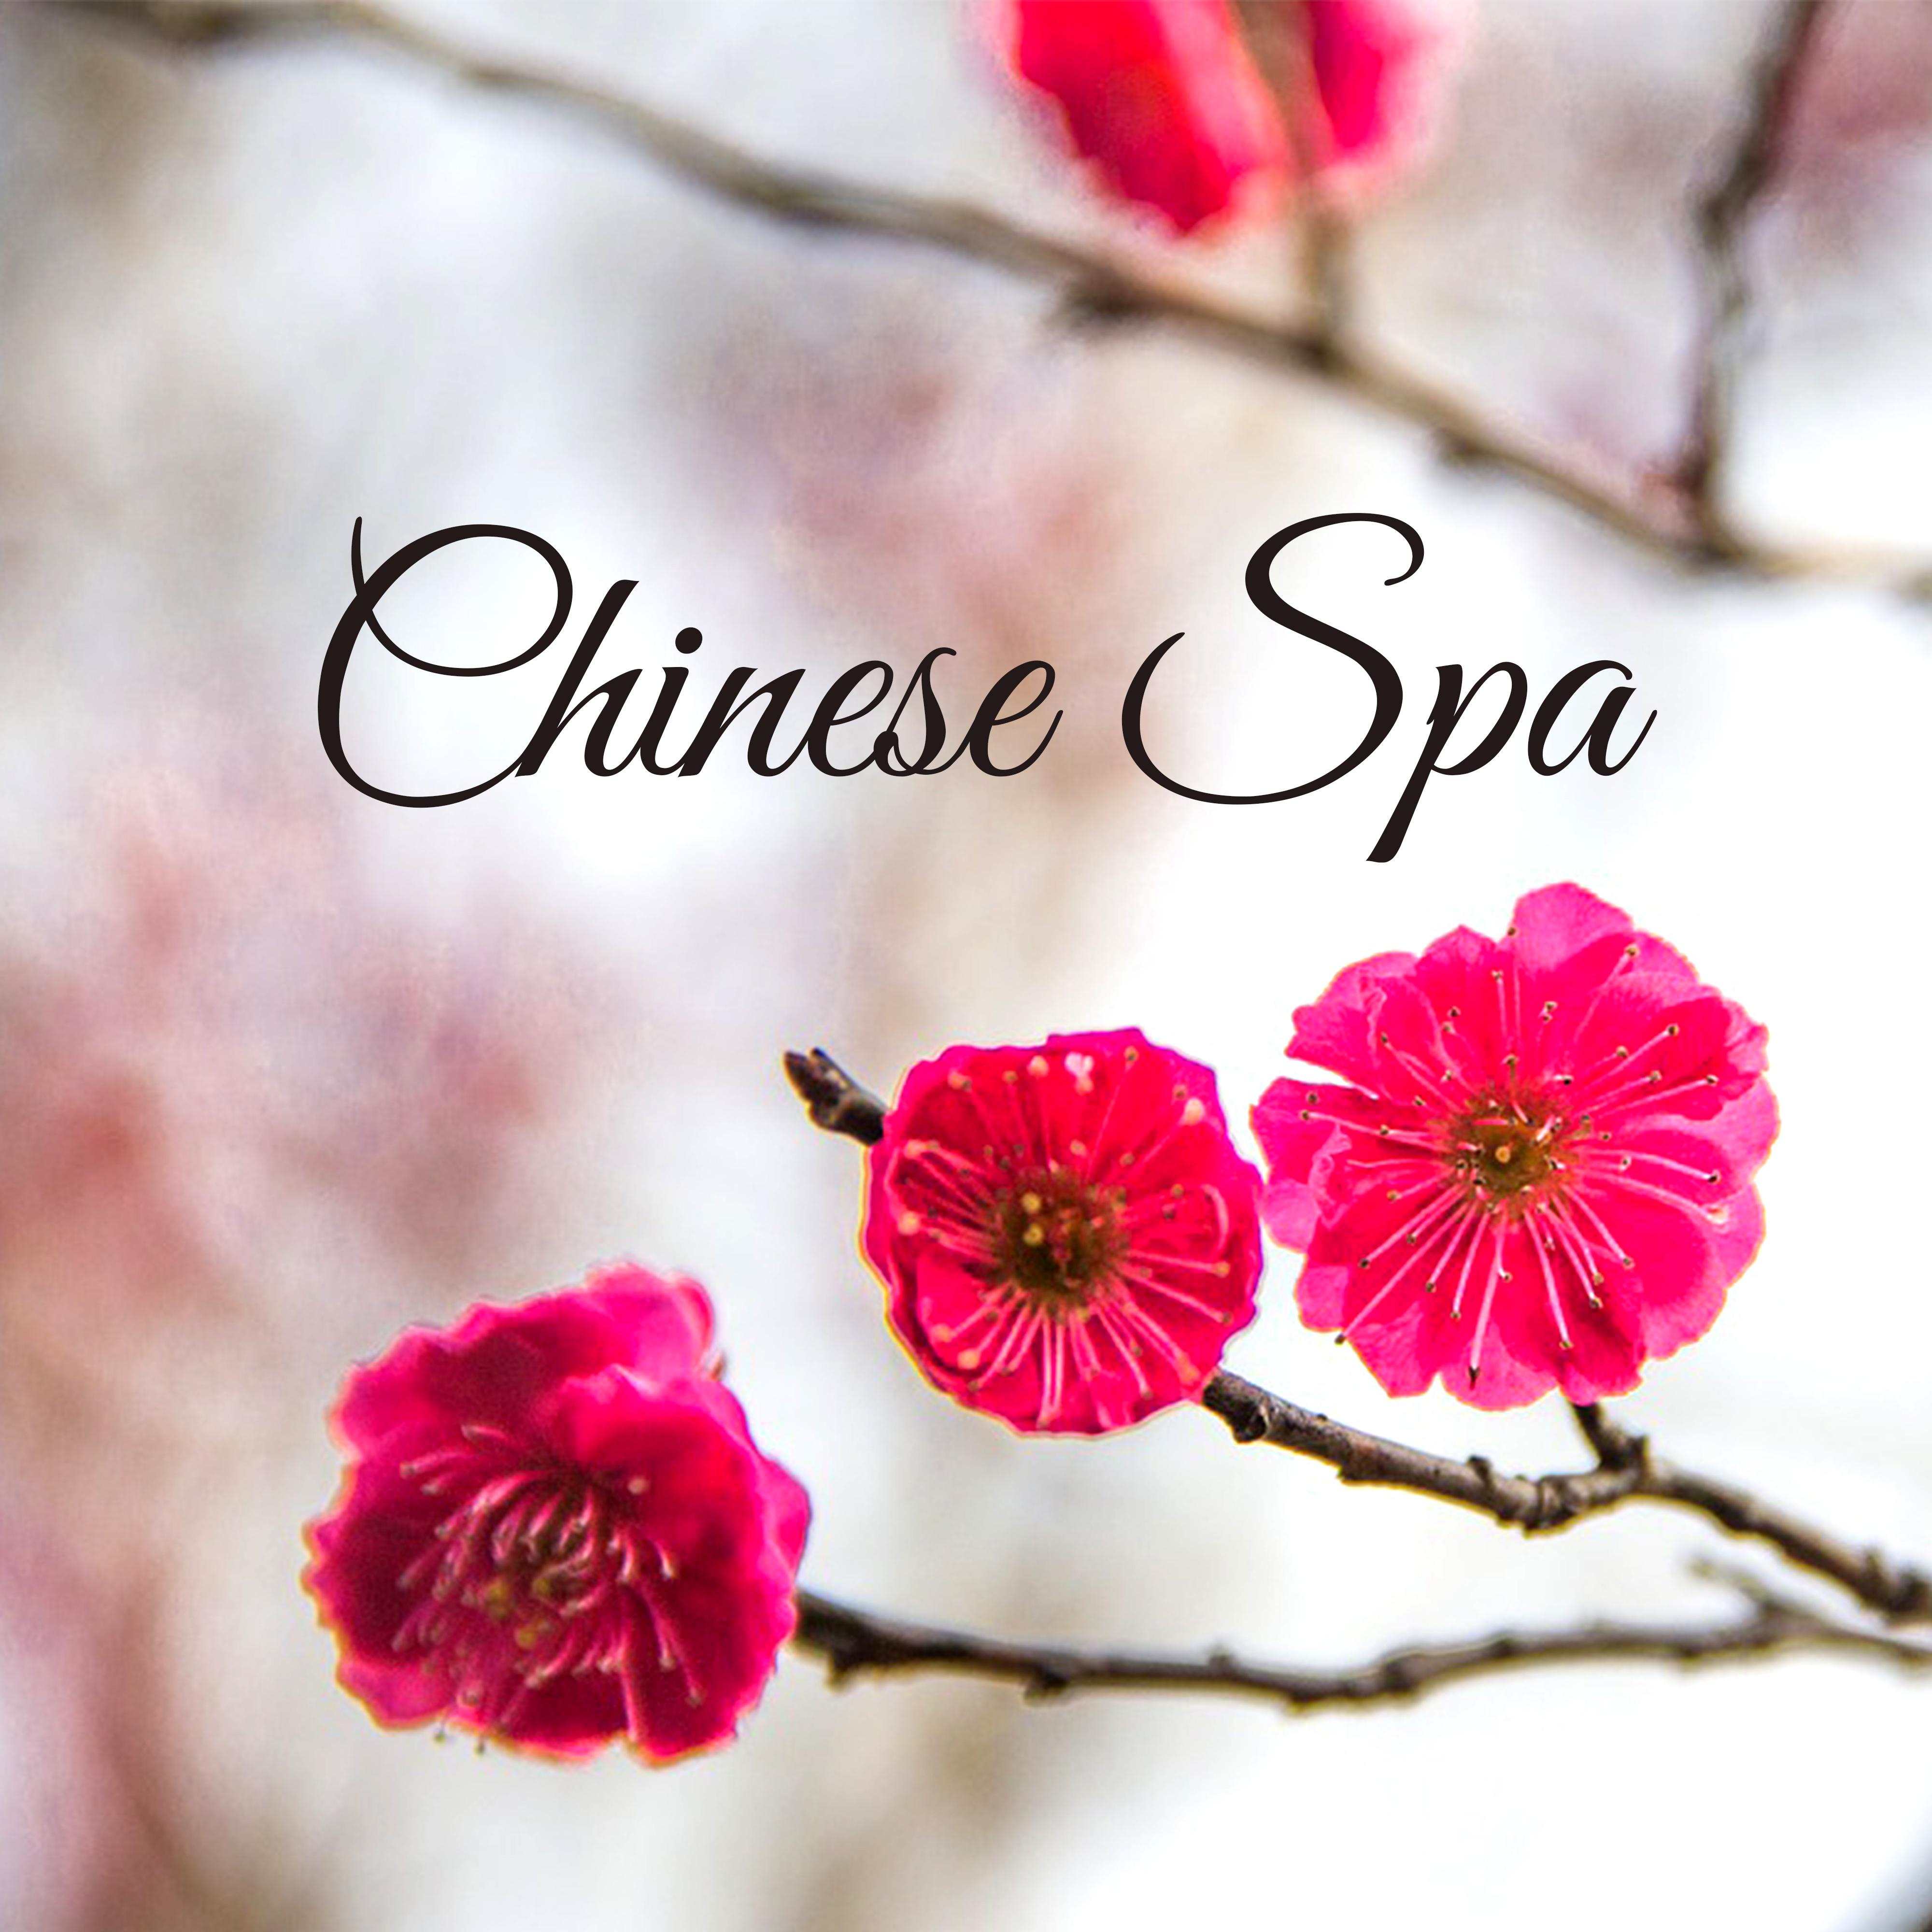 Chinese Spa  Asian Zen, Massage Therapy, Oriental Spa  Wellness, Stress Relief, Soothing Melodies